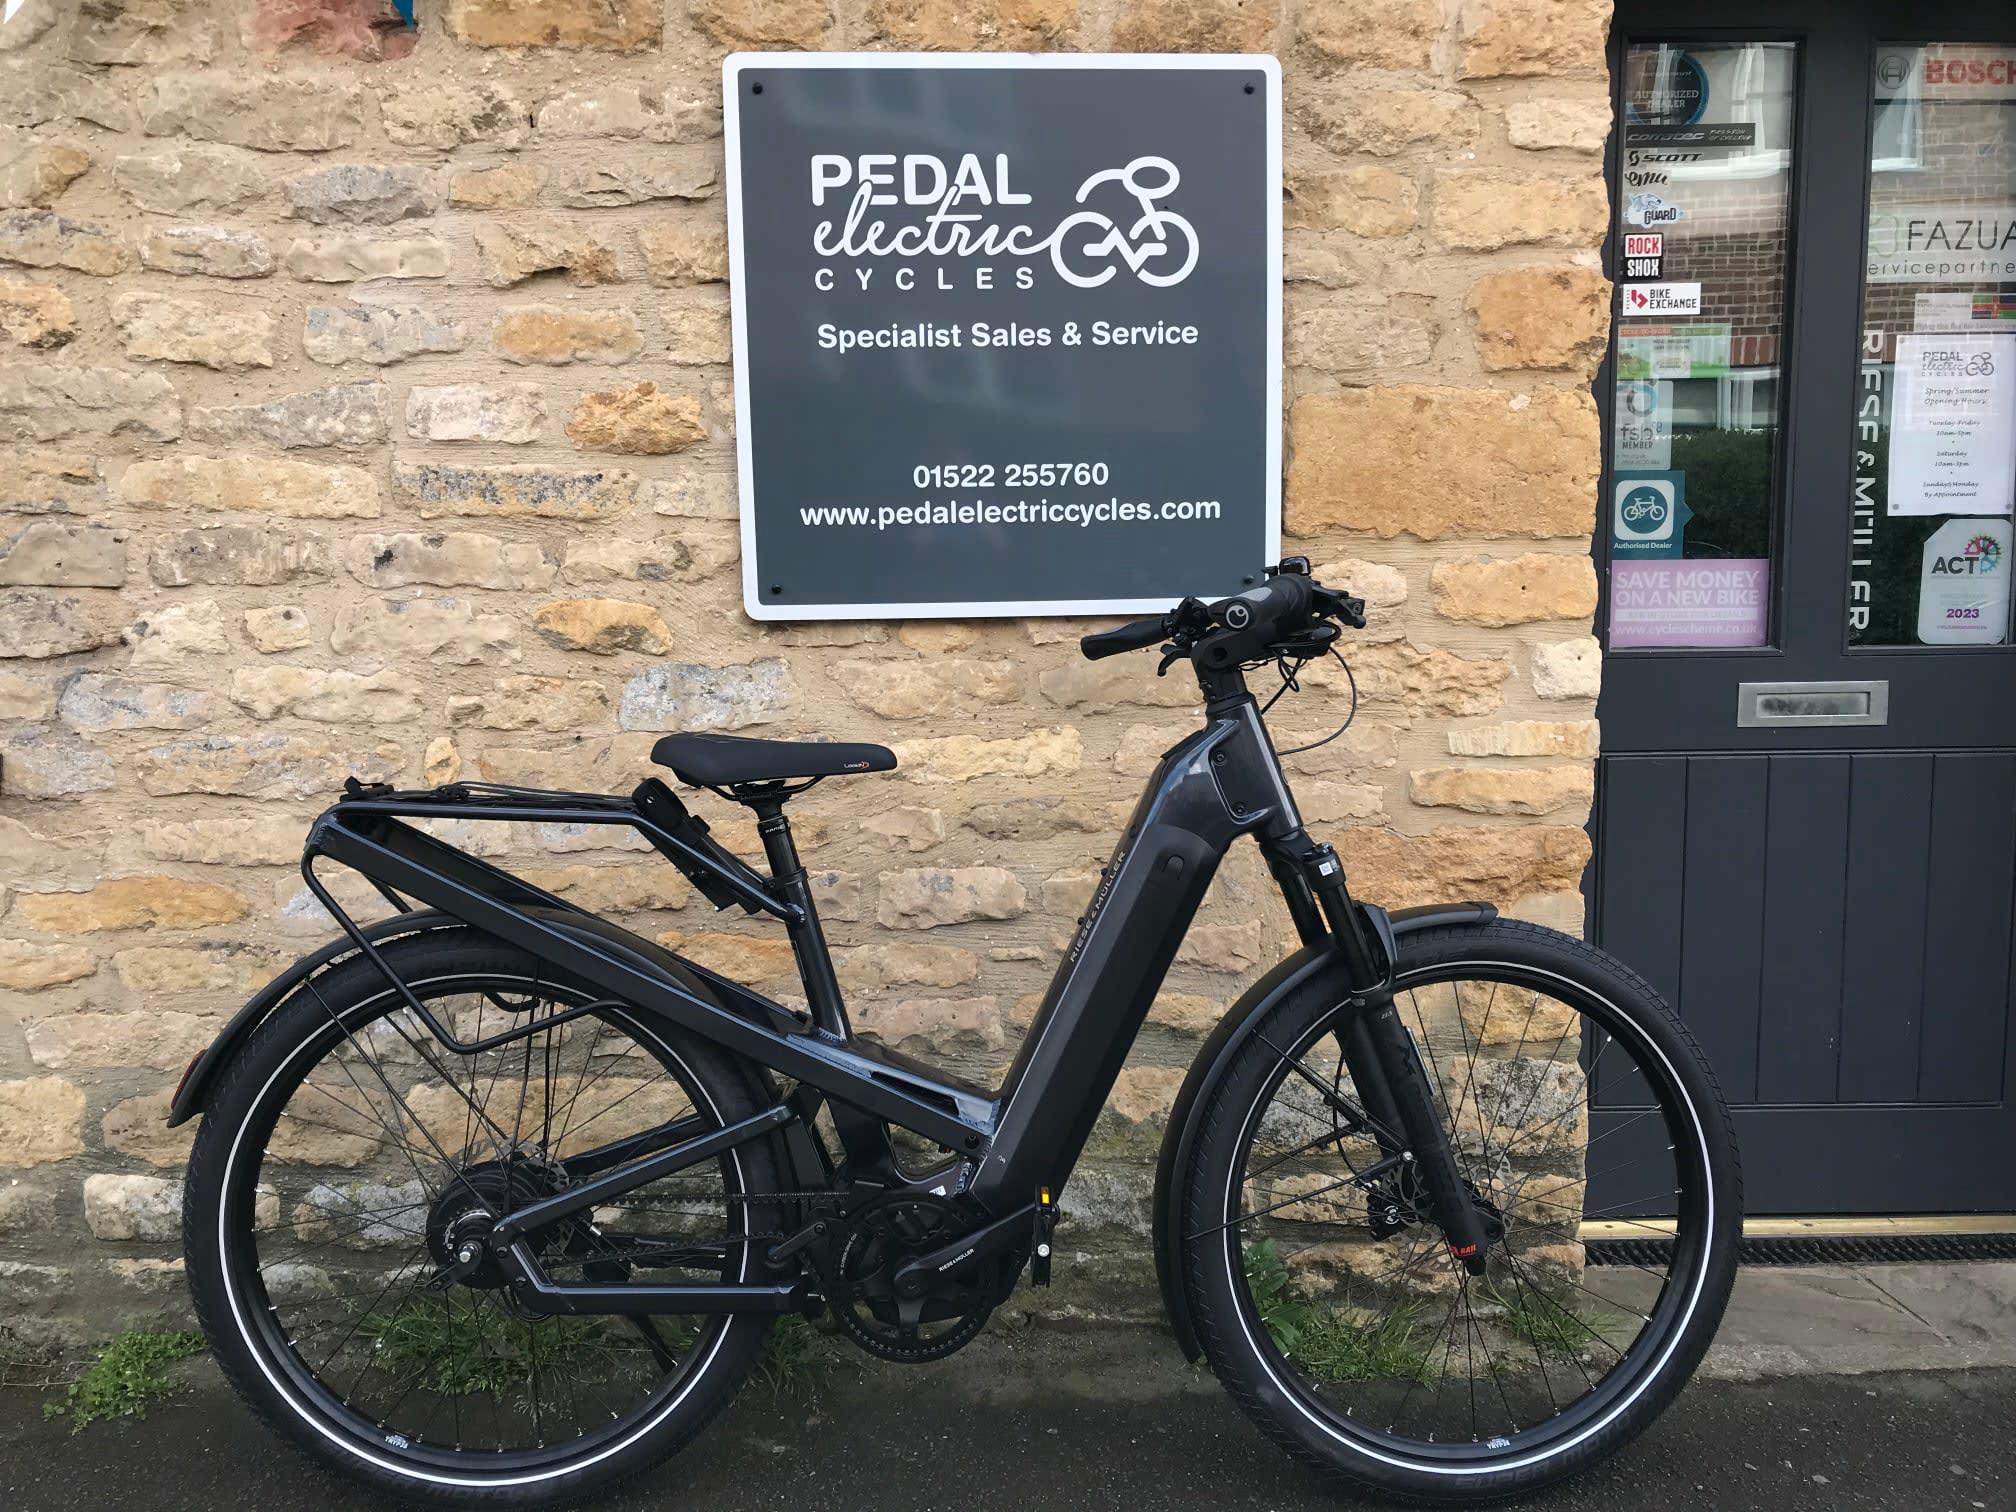 Pedal Electric Cycles Lincoln 01522 255760